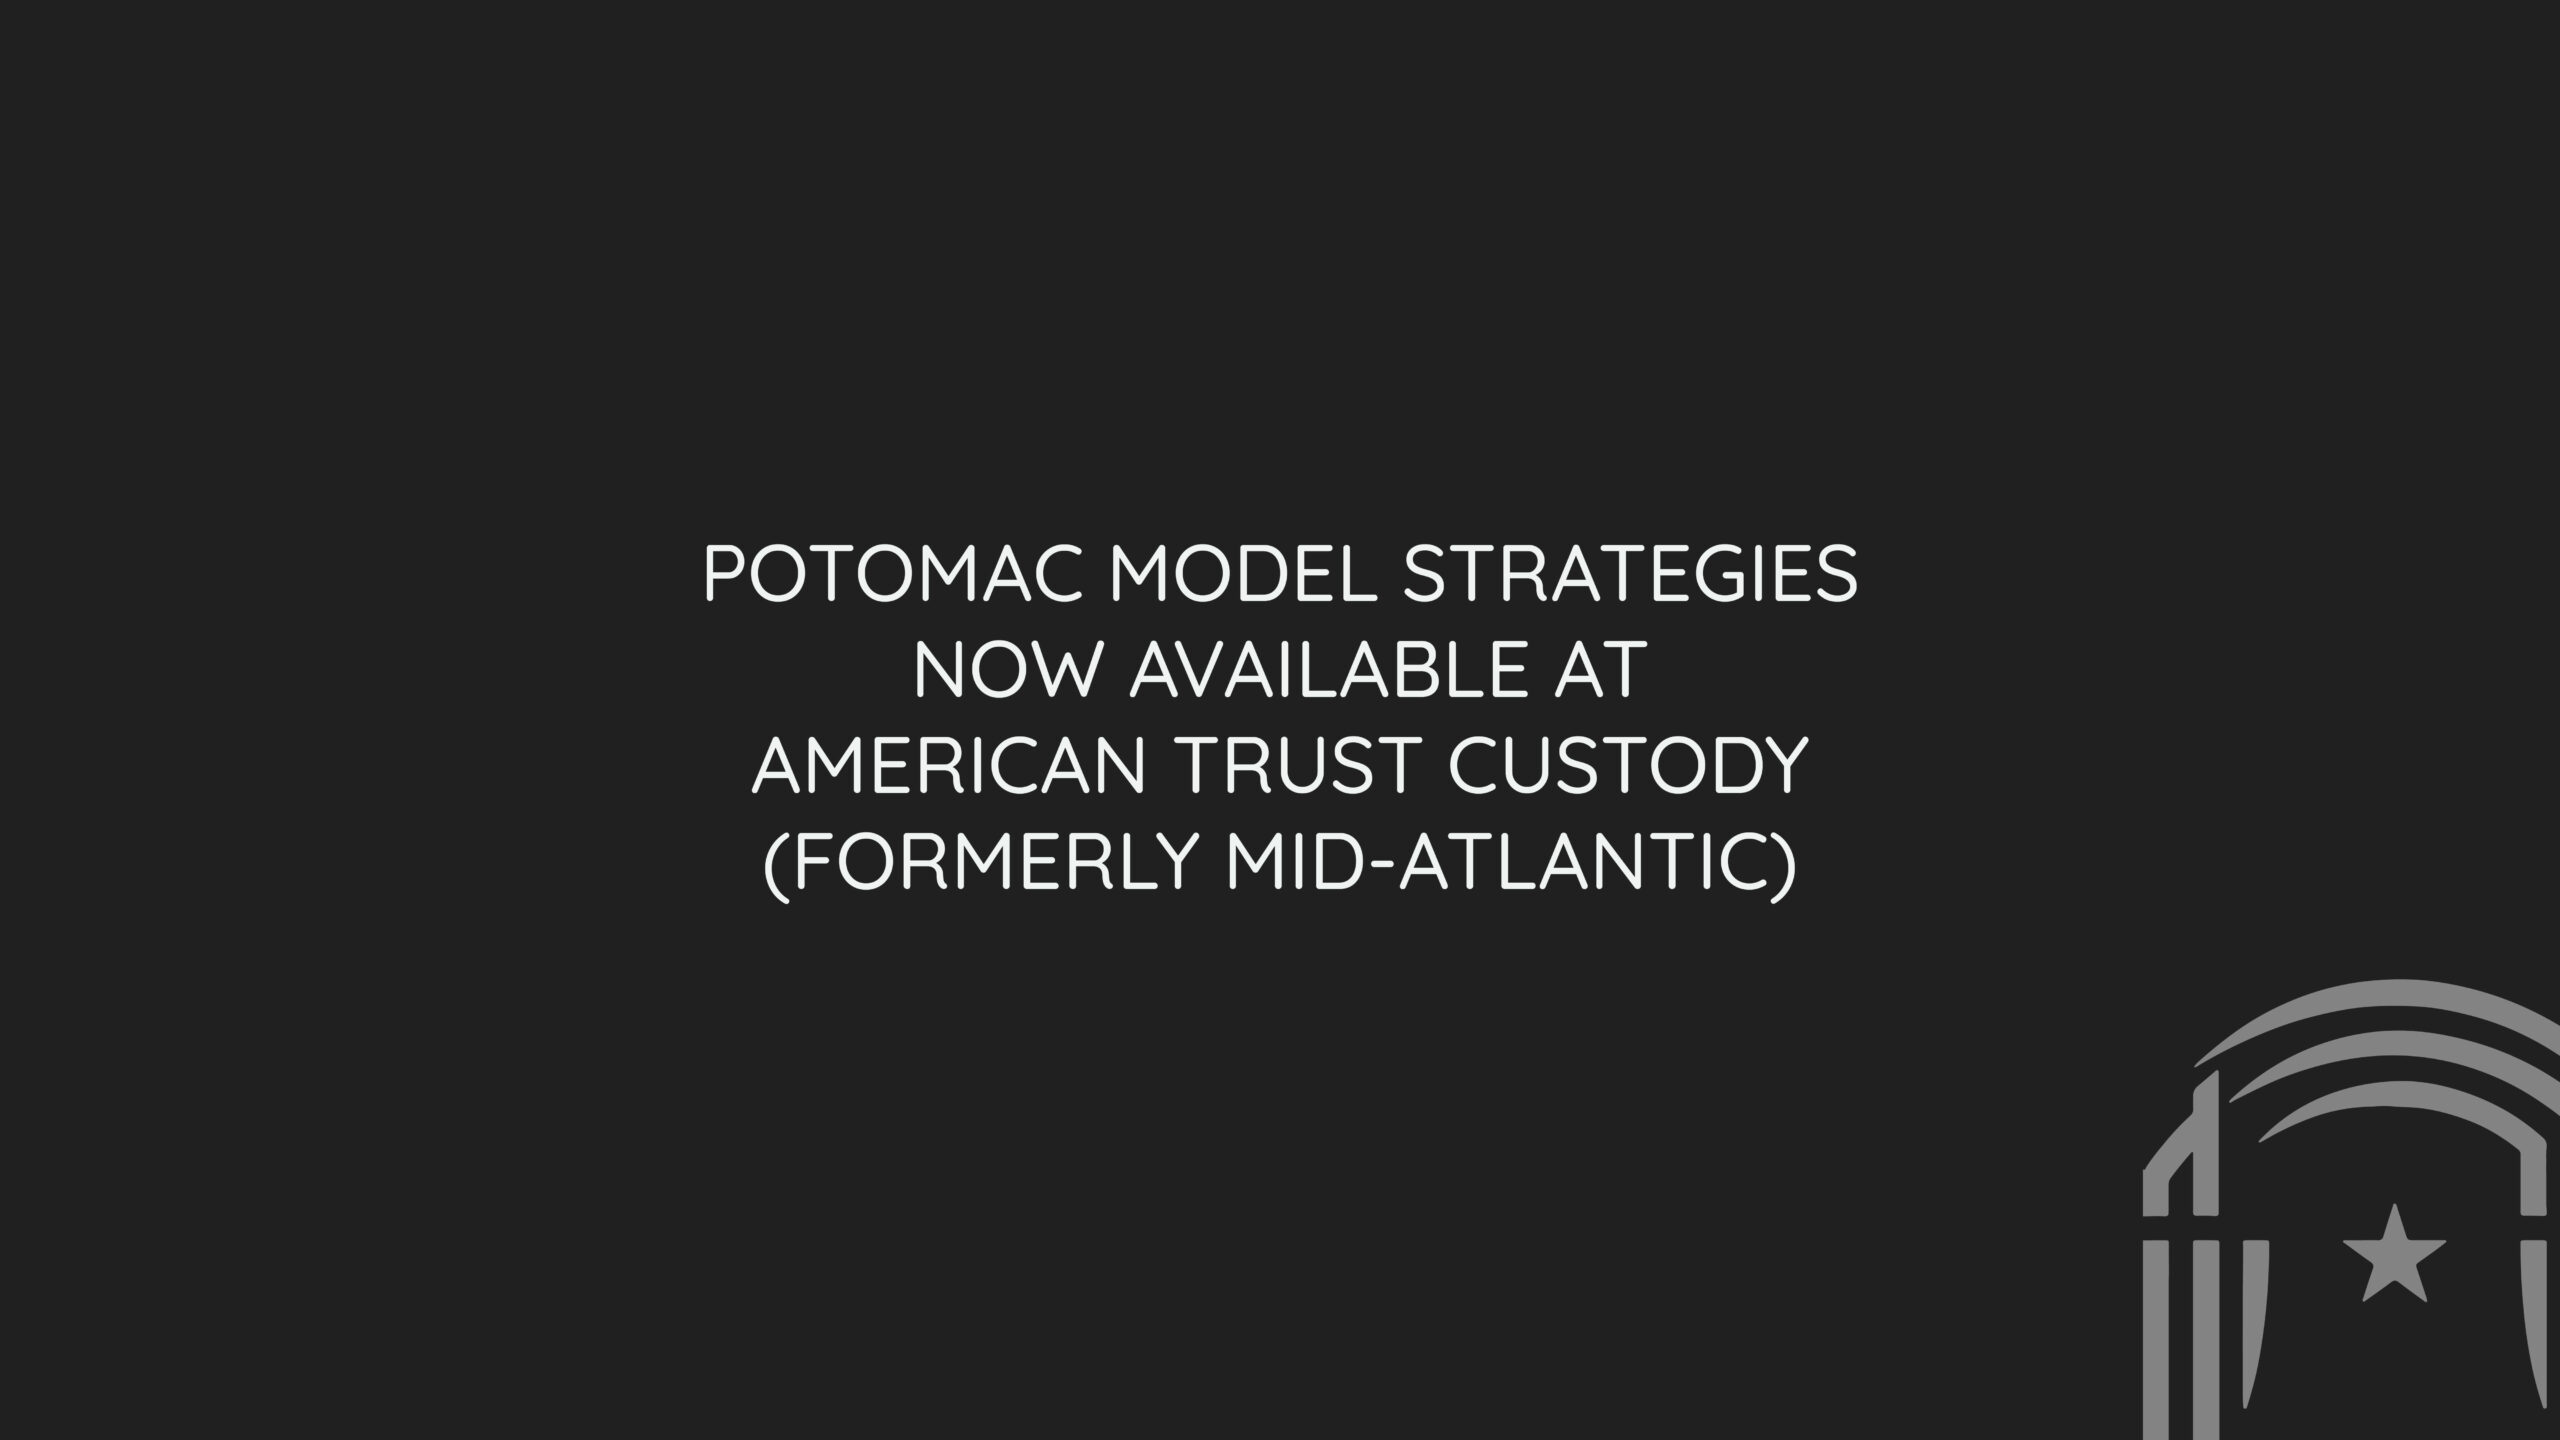 Press Release: Potomac Fund Management Now Available at American Trust Custody